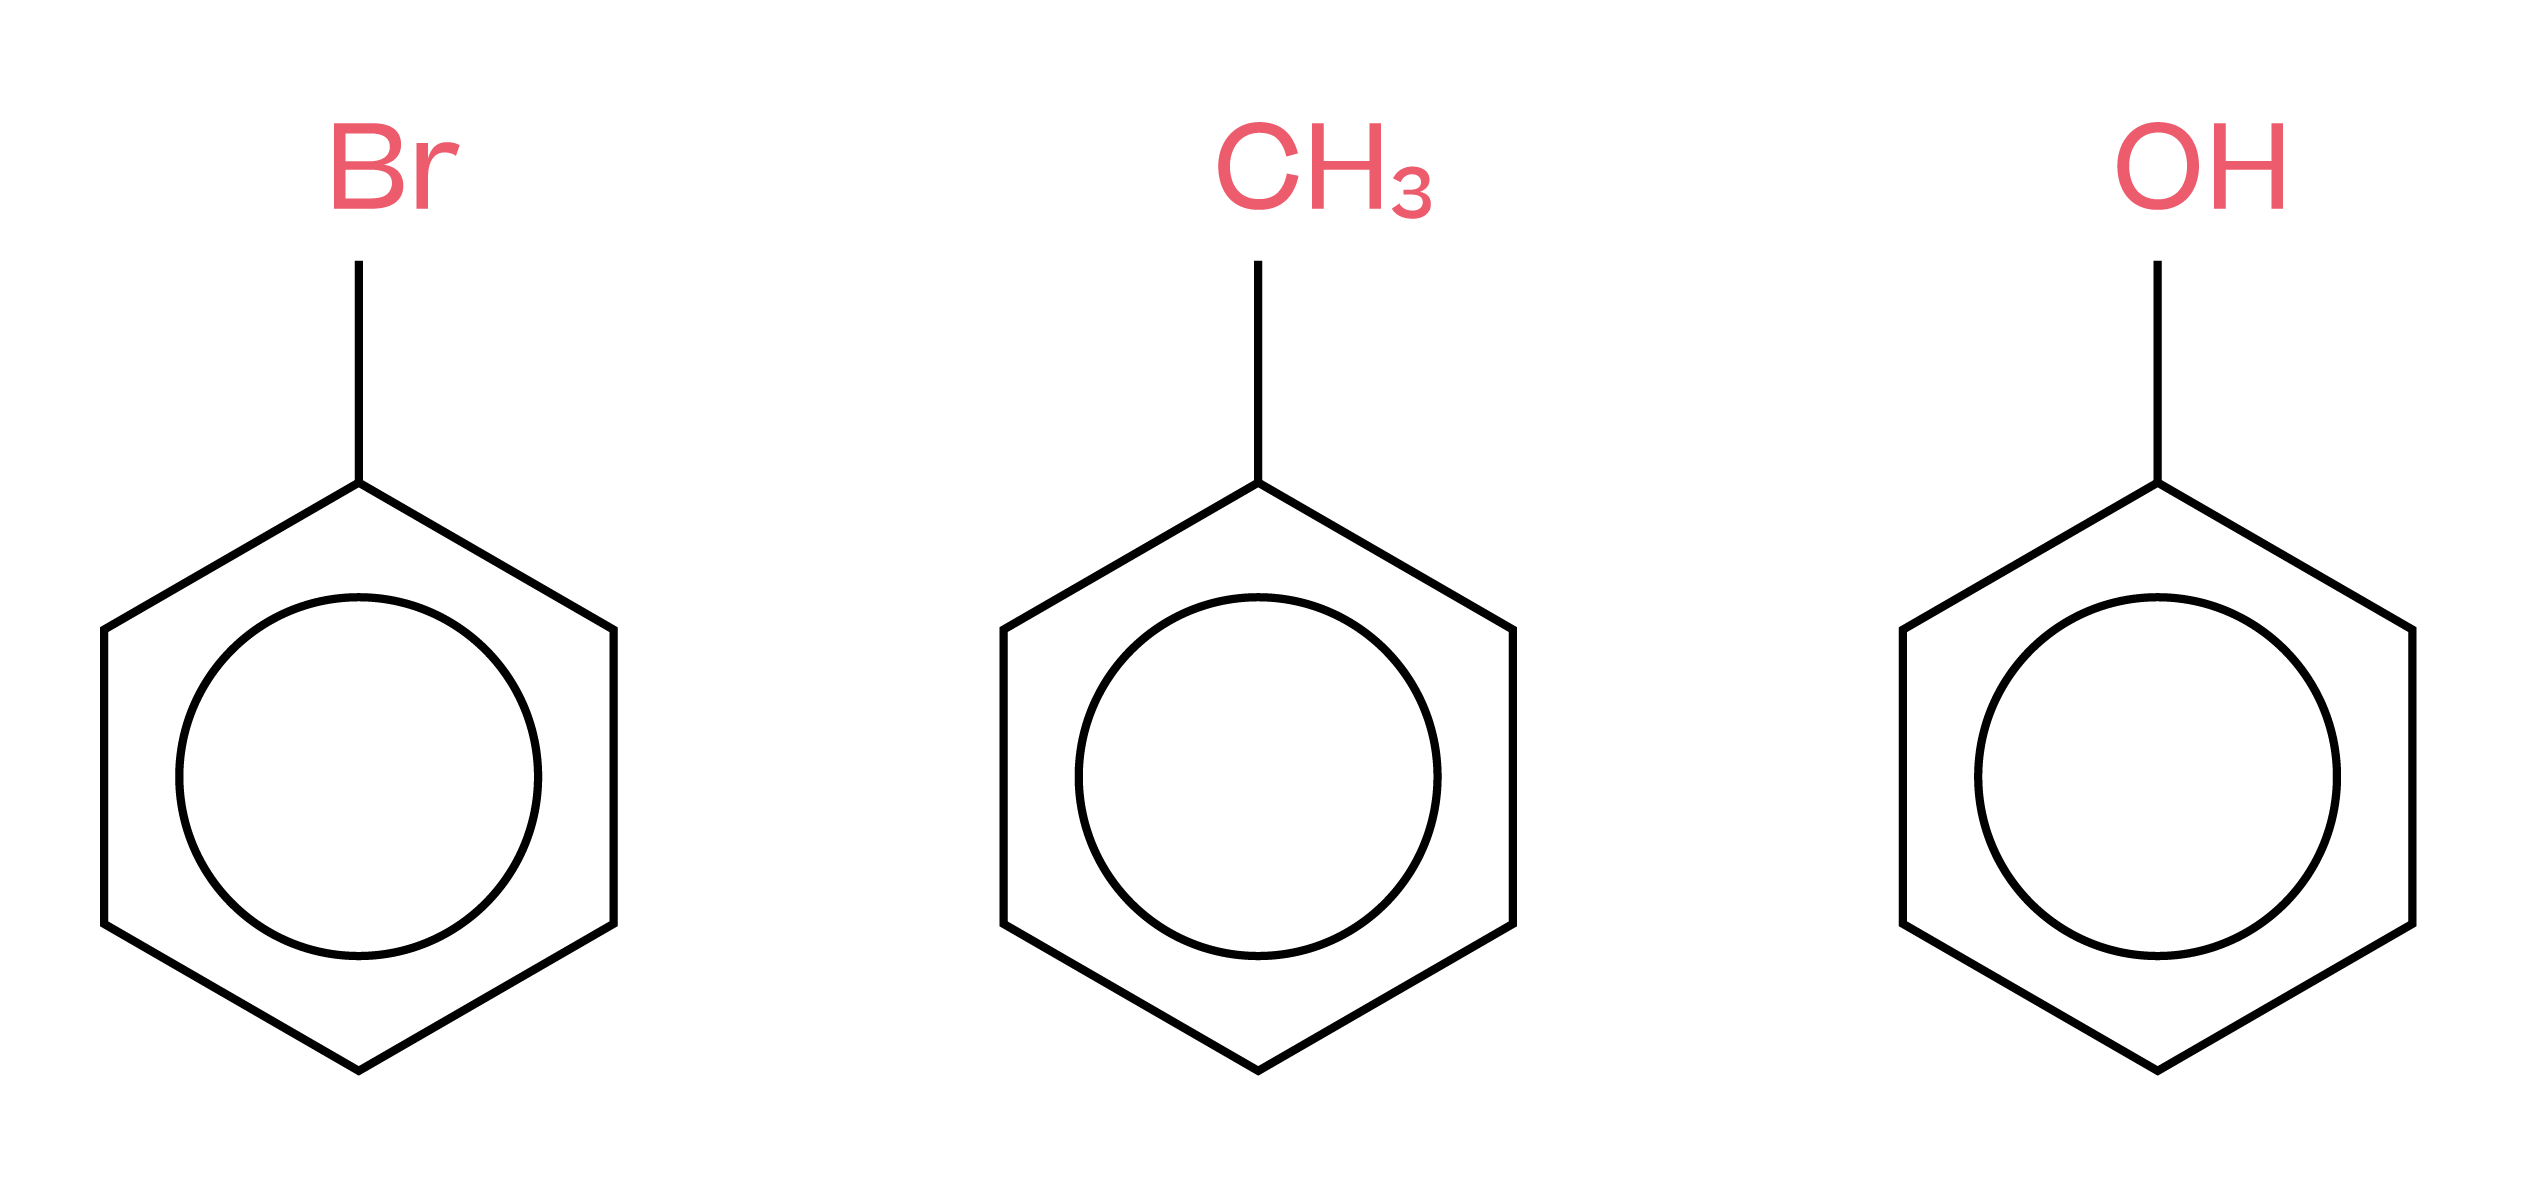 Benzene (C6H6) - Definition, Discovery, Structure, Resonance, Aromaticity &  Uses of Benzene (C6H6)